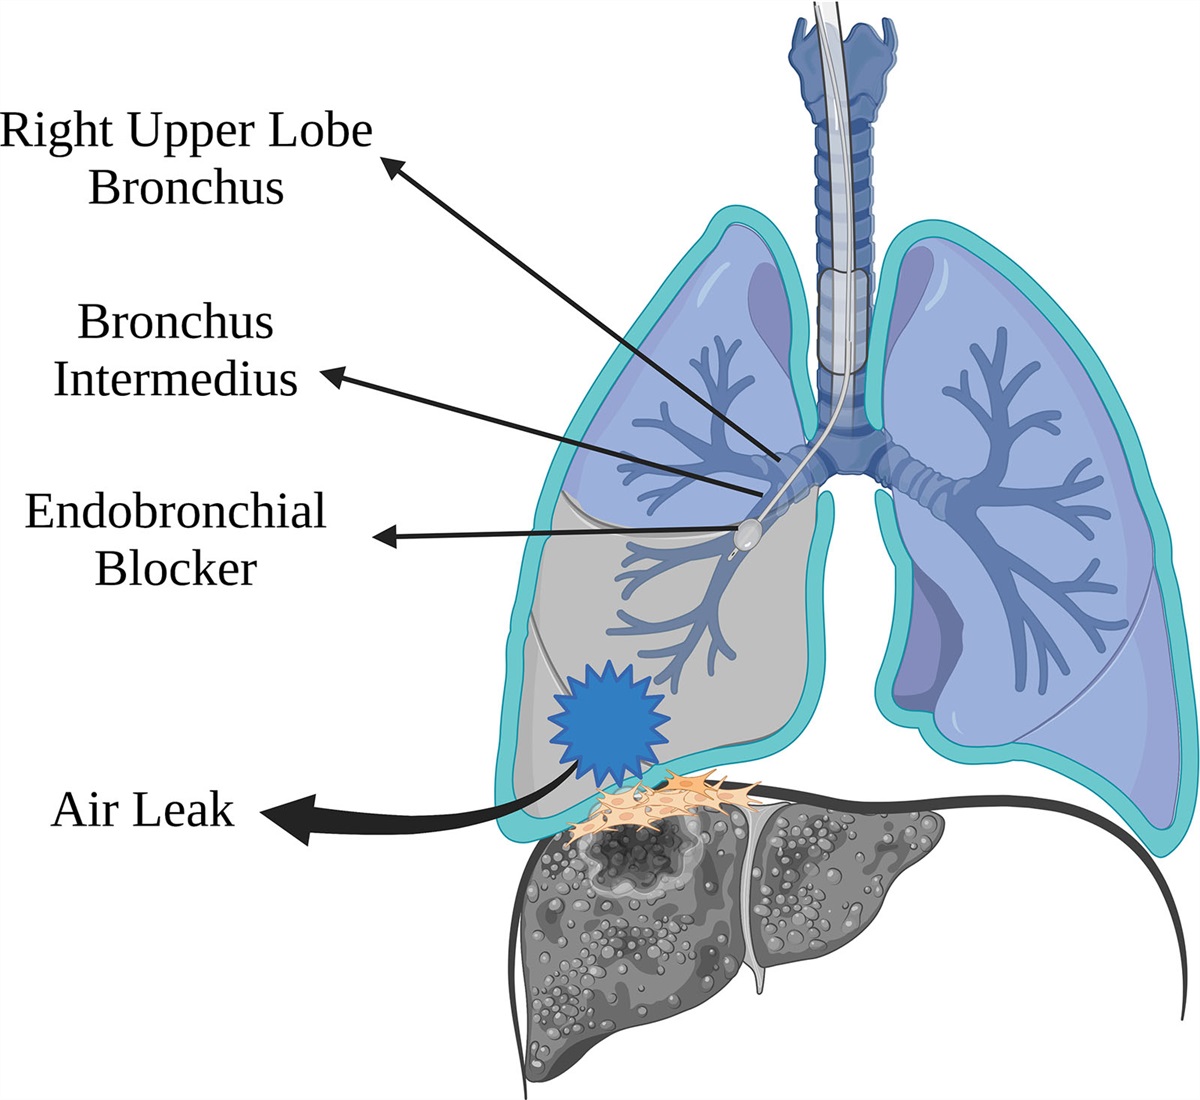 Pulmonary Injury Causing a Massive Air Leak During Liver Transplantation: A Case Report and Discussion of Decision-Making